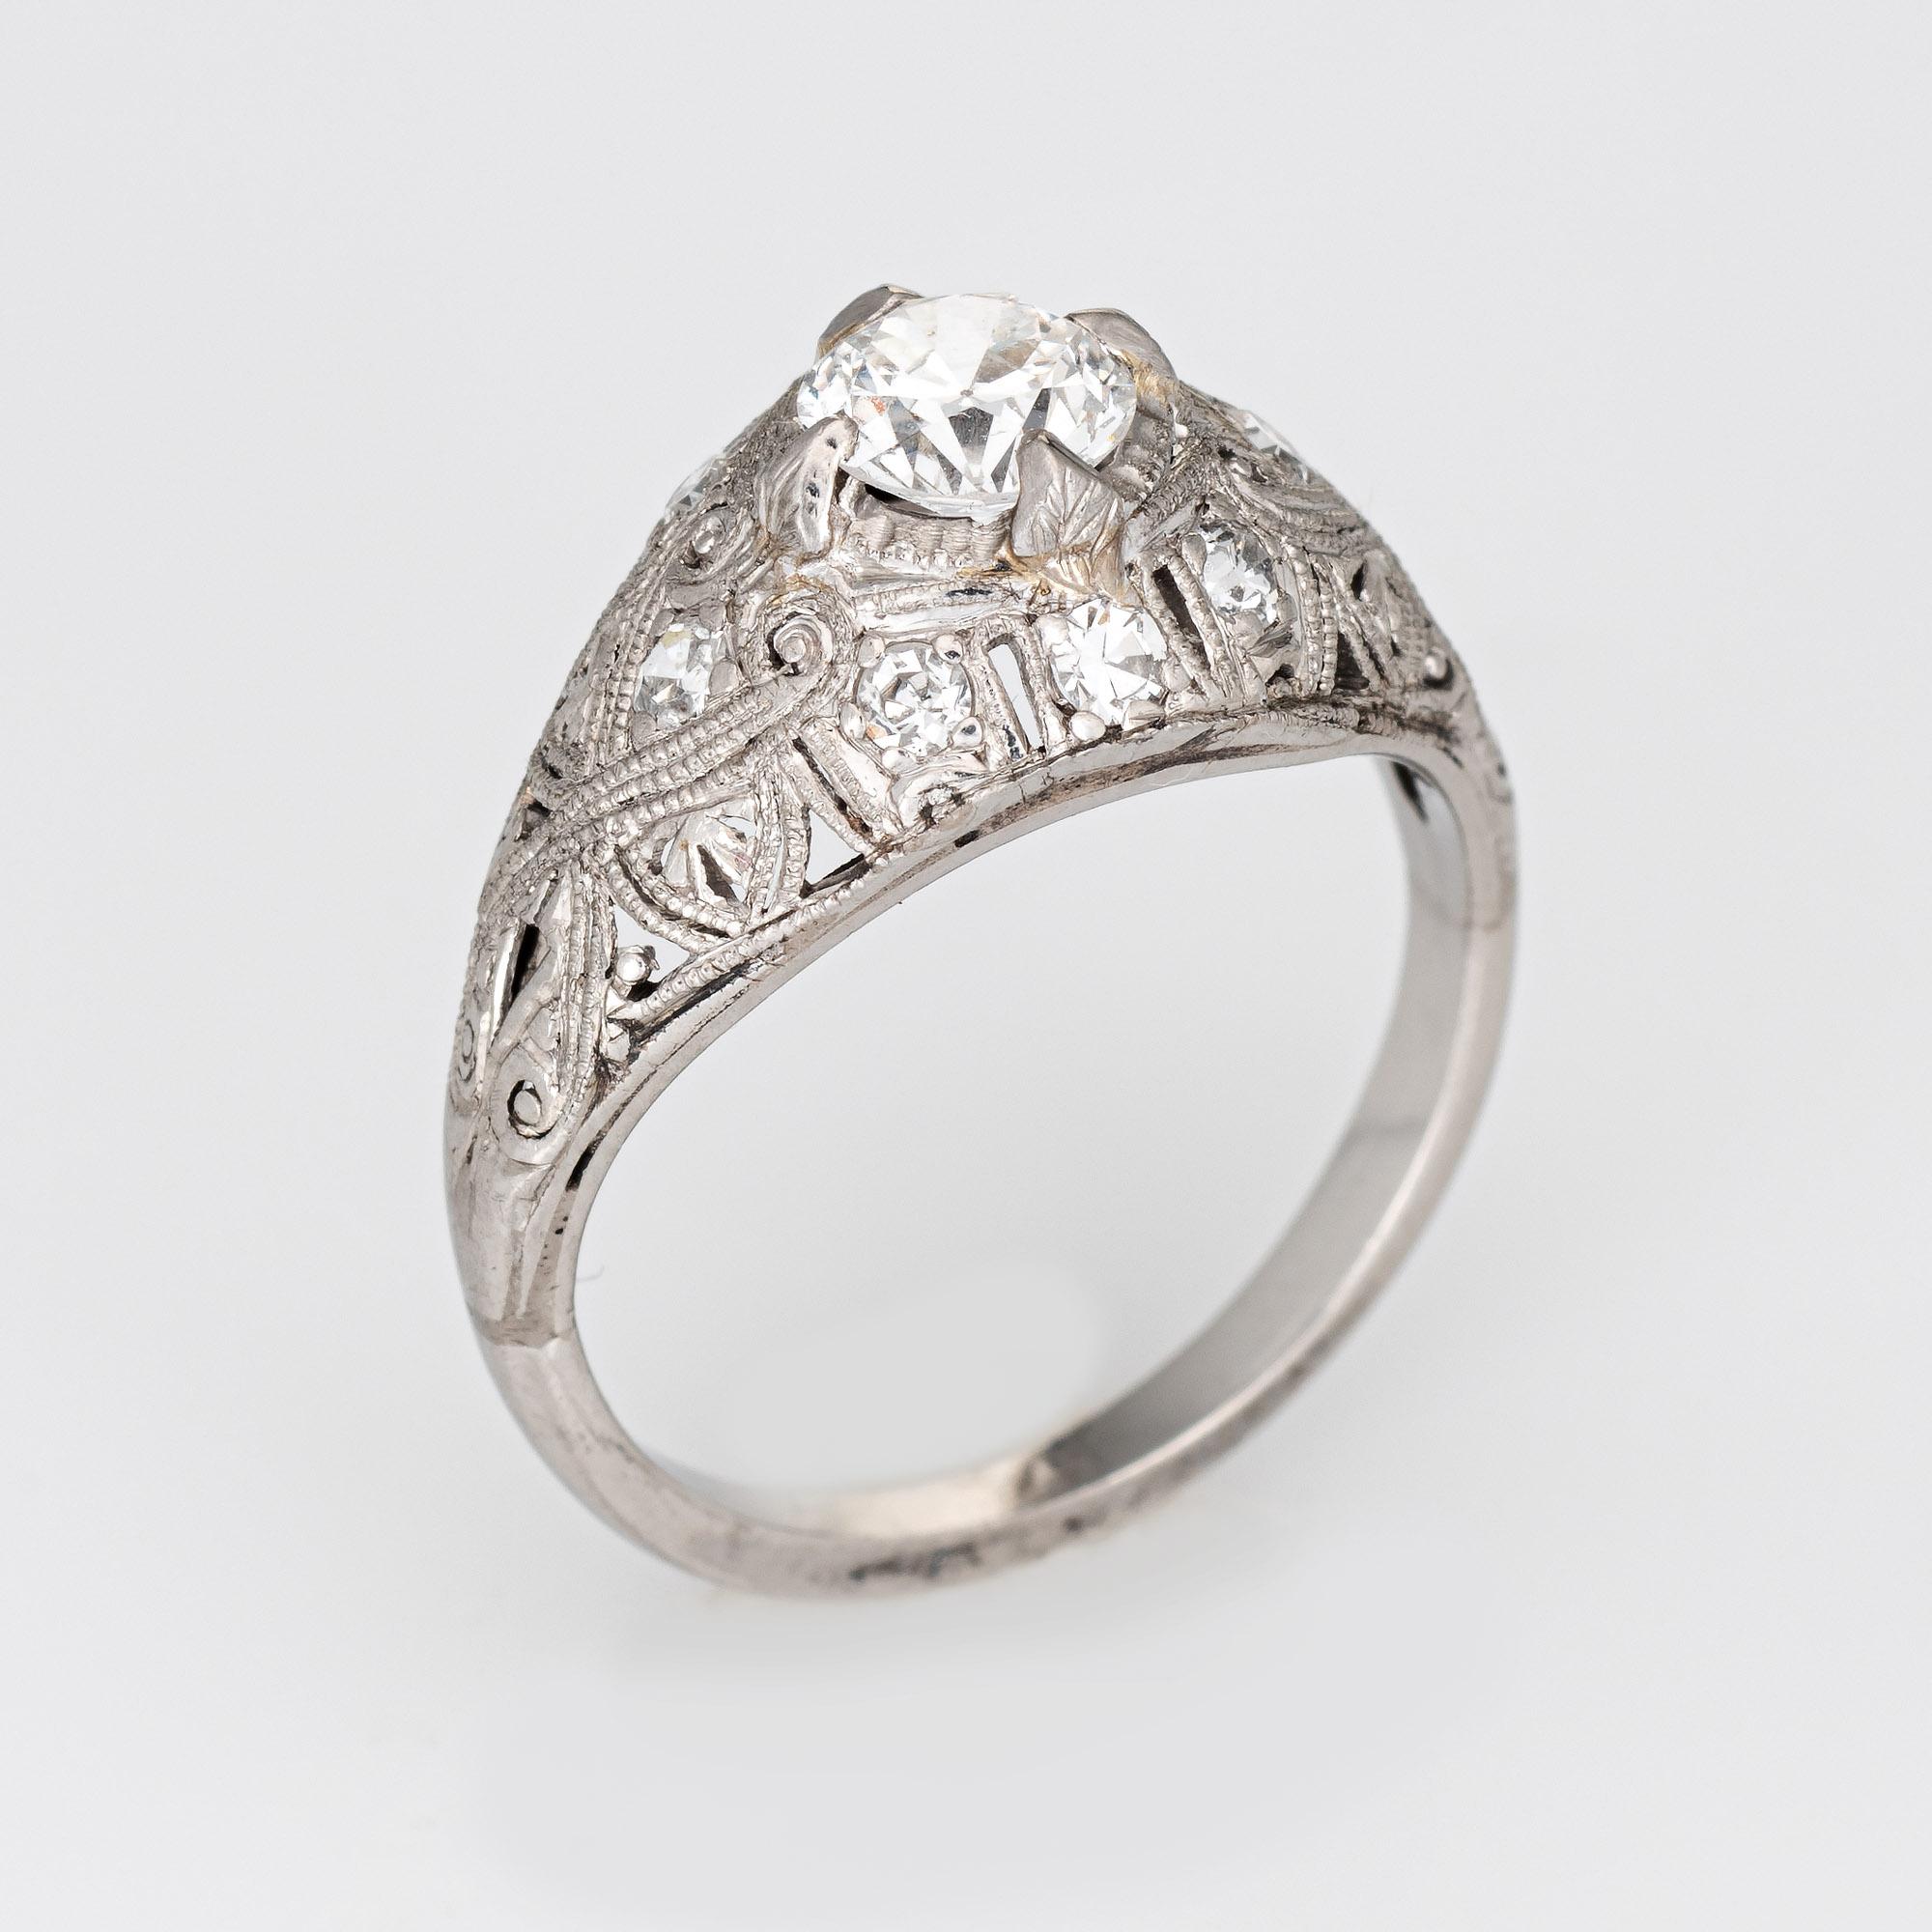 Finely detailed antique Edwardian diamond engagement ring (circa 1900s to 1910s) crafted in 900 platinum. 

Center set old European cut diamond is estimated at 0.55 carats (estimated at H-I color and VS2-SI1 clarity). 8 single cut diamonds total an